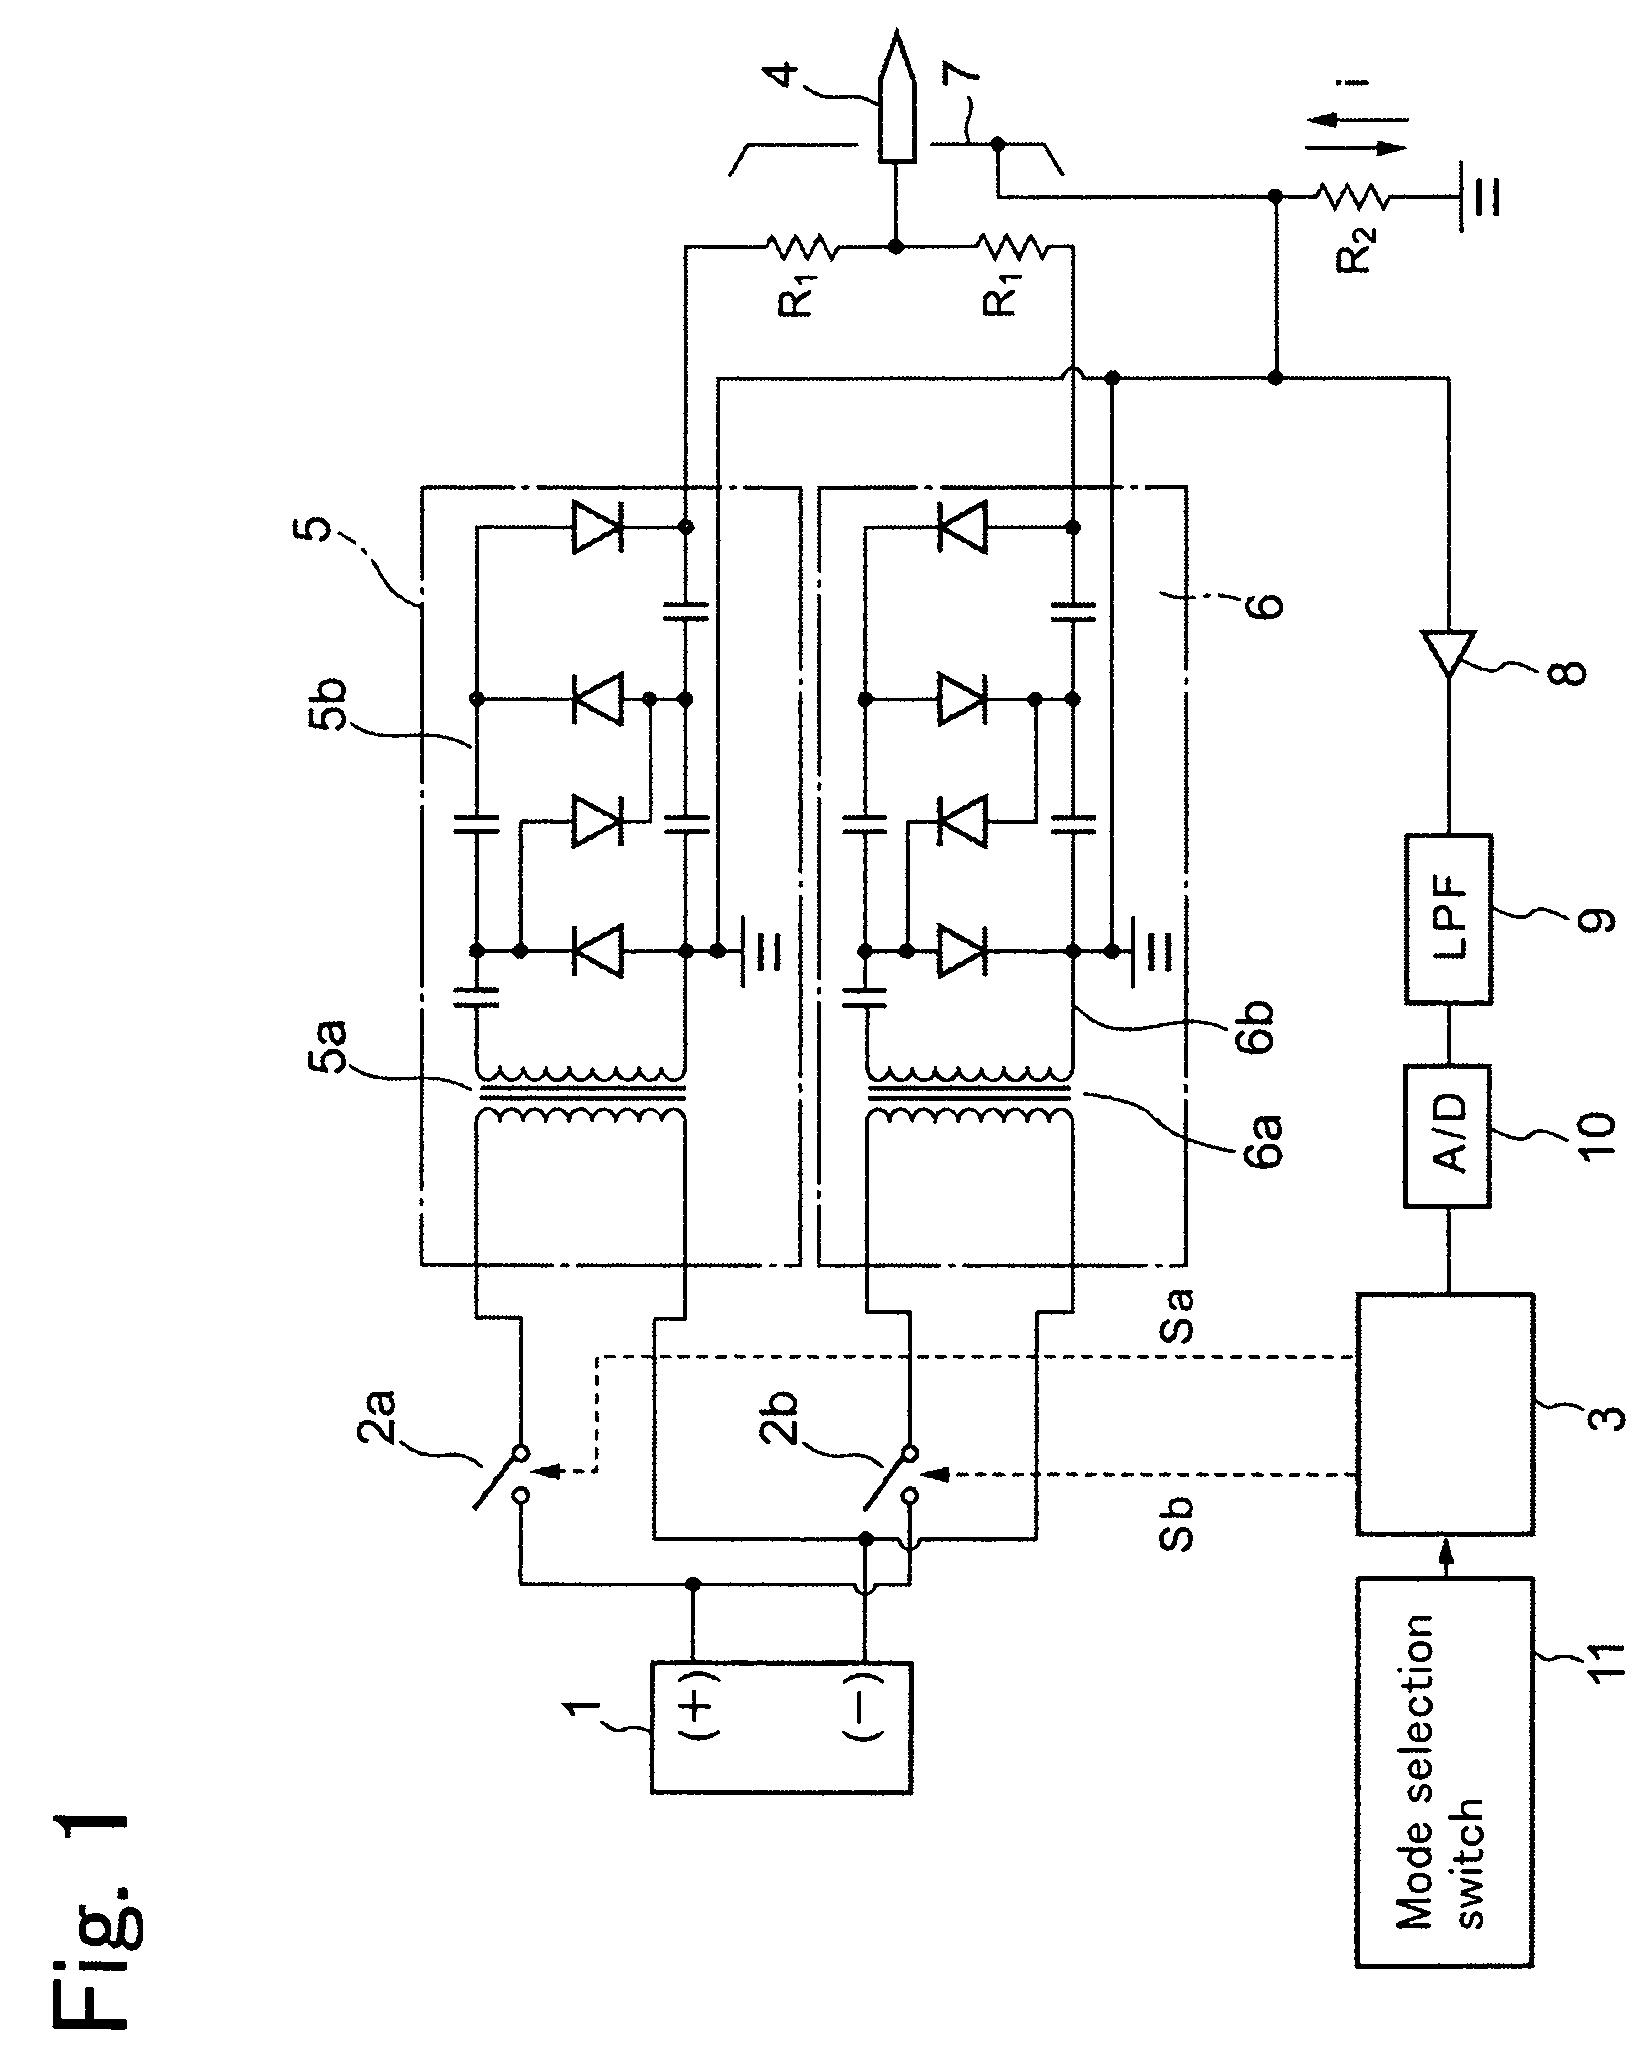 Electricity removal apparatus